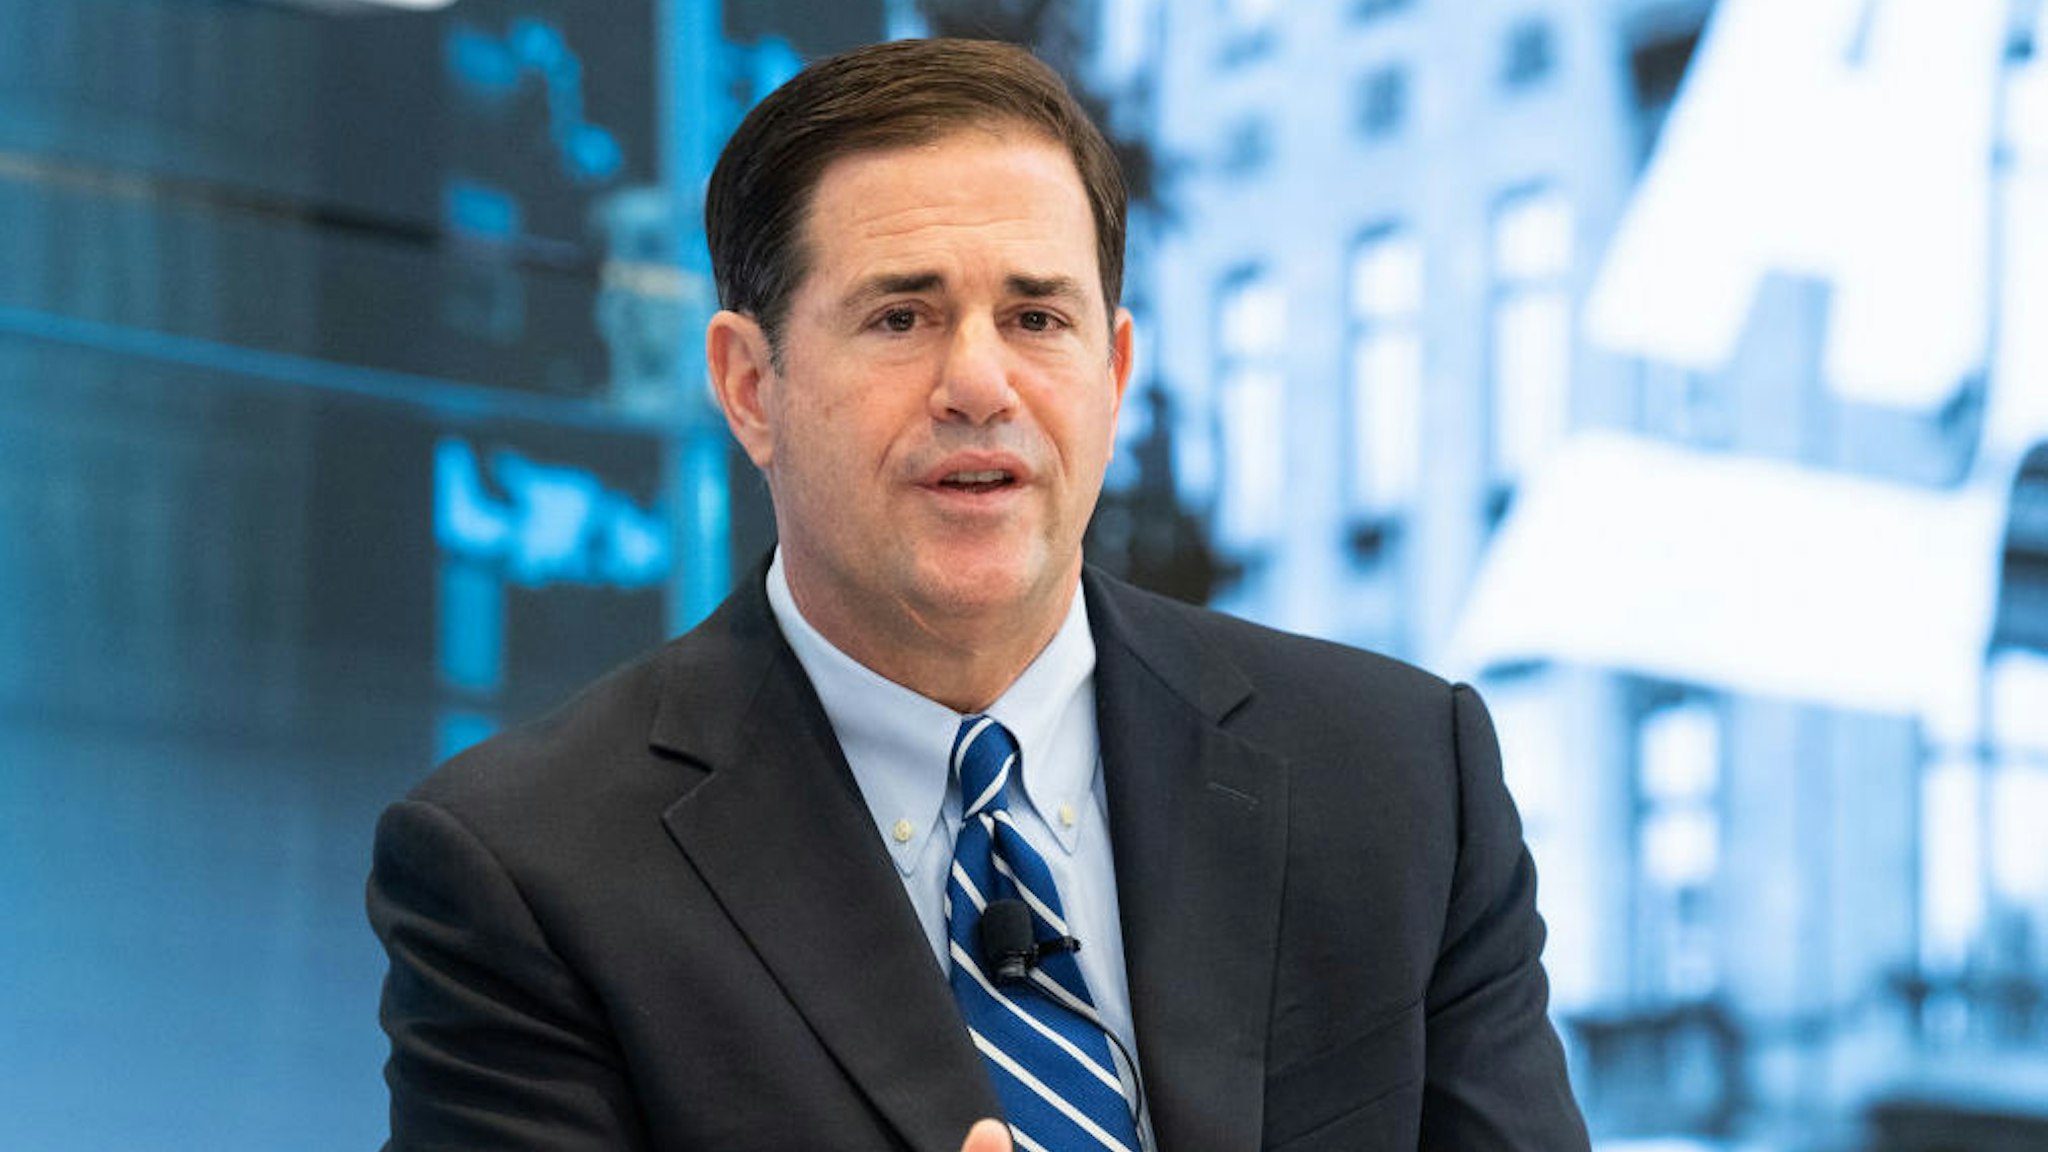 WASHINGTON, DC, UNITED STATES - 2018/06/07: Governor Doug Ducey (R-AZ) discussing the opioid crisis and foster care families and policies to protect children and treat parents at the American Enterprise Institute in Washington